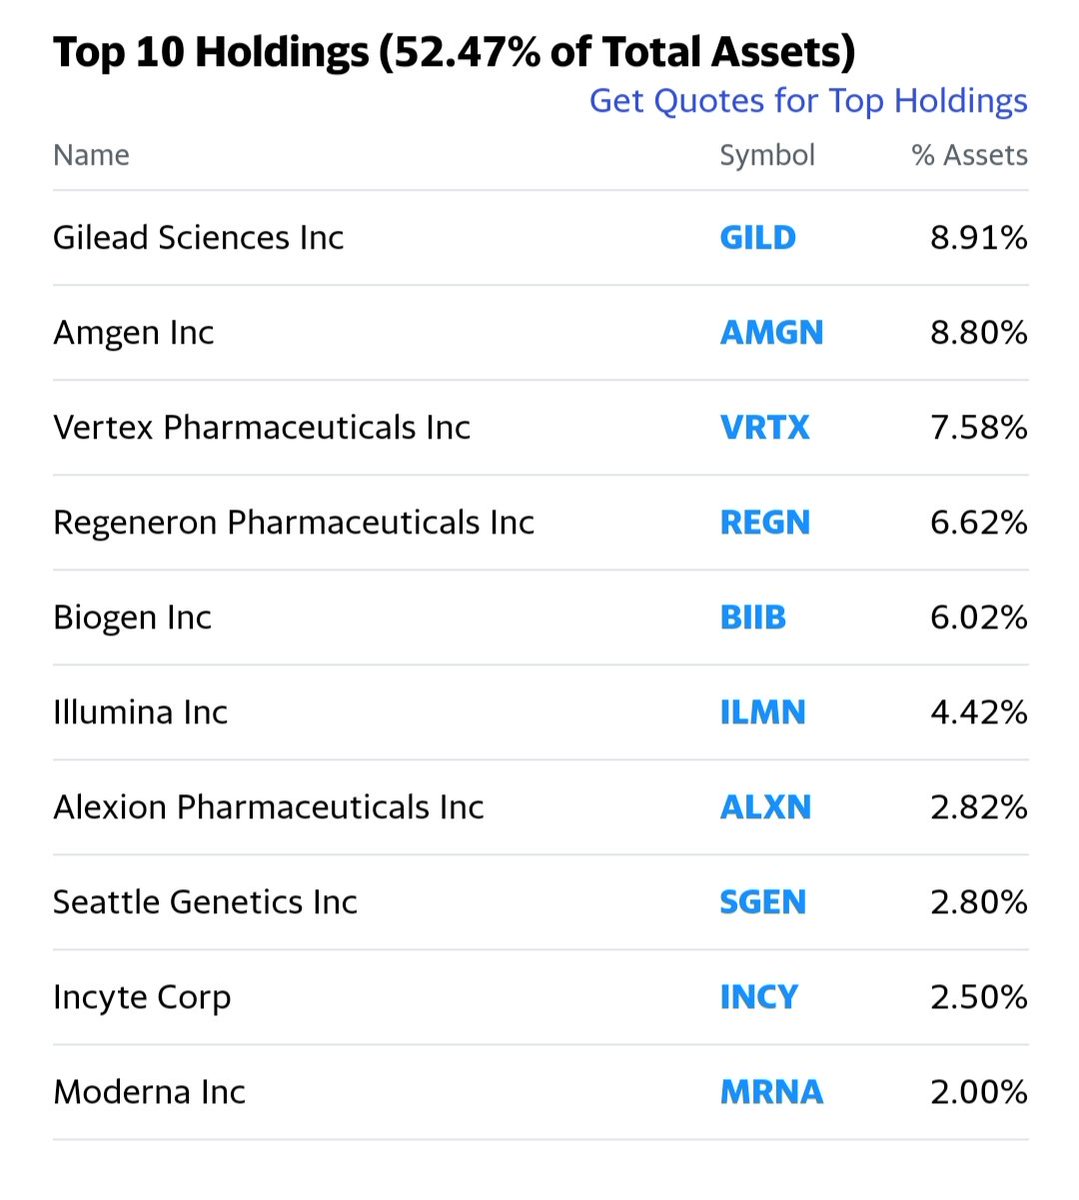 Emhoff has up to $15,000 invested in a iShares Nasdaq Biotechnology fund, with notable holdings including Gilead Sciences, Amgen, and Biogen.